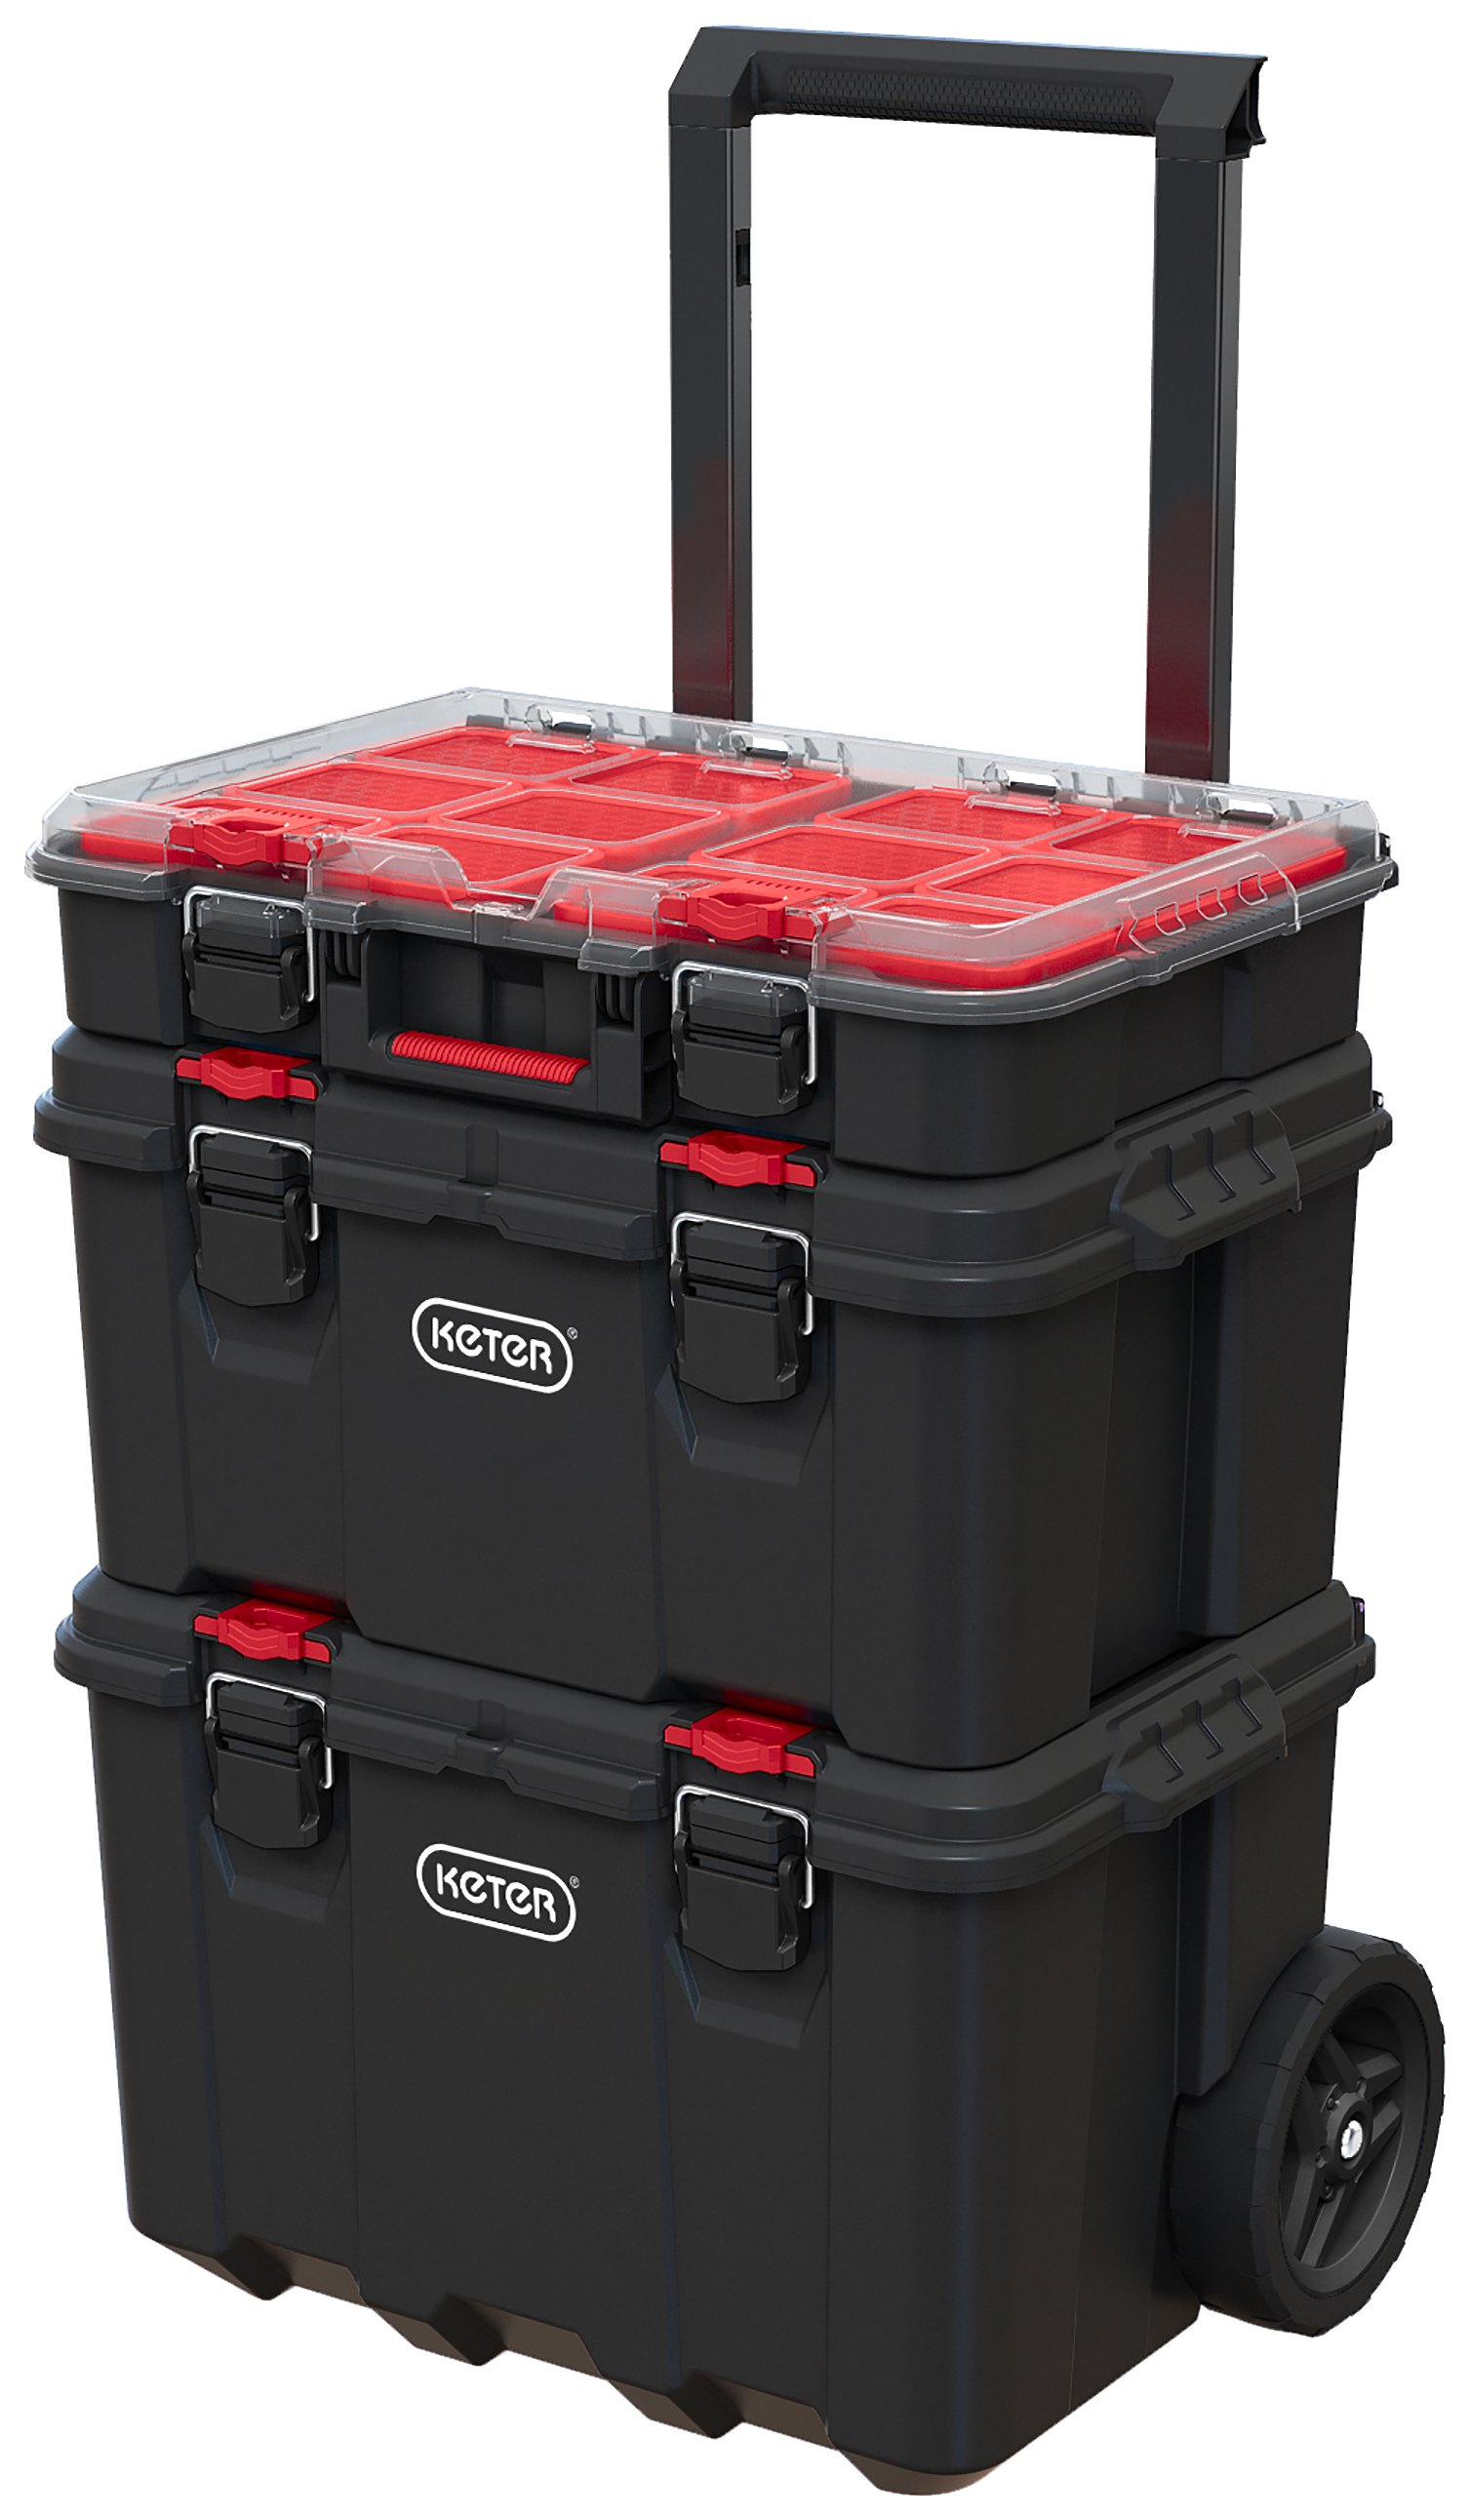 Keter Stack N' Roll 3 Piece Tool Storage Mobile System